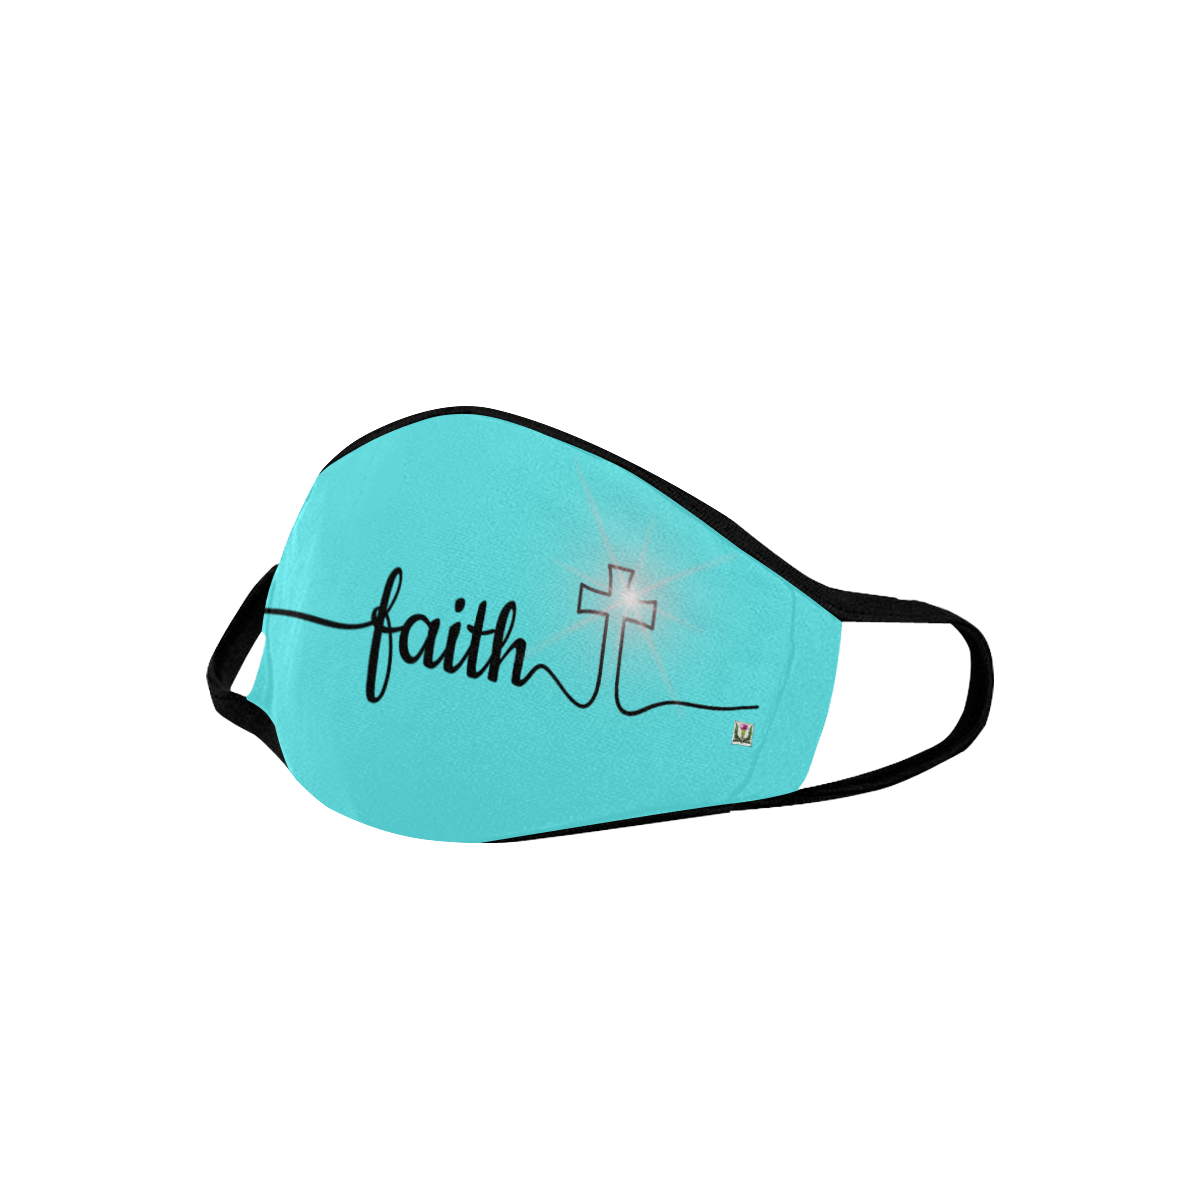 Fairlings Delight's The Word Collection- Faith 53086a3 Mouth Mask